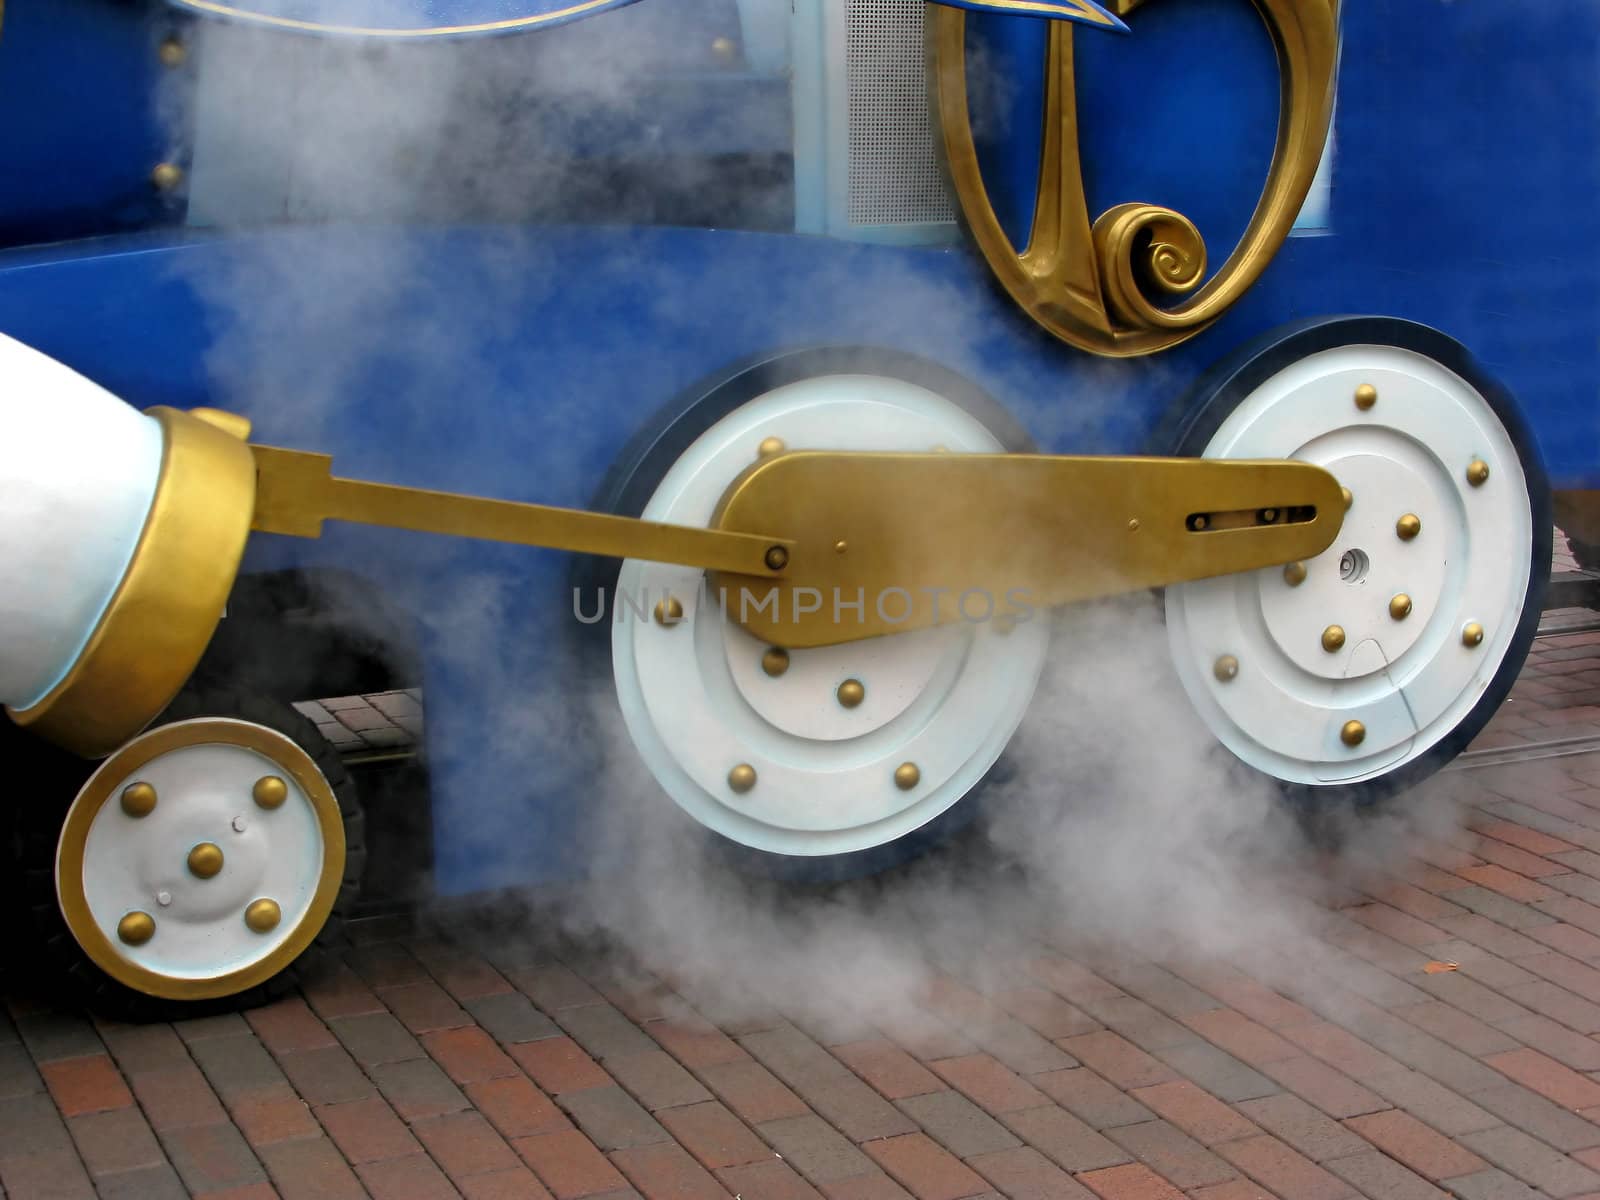 Train wheels with steam coming off of them.